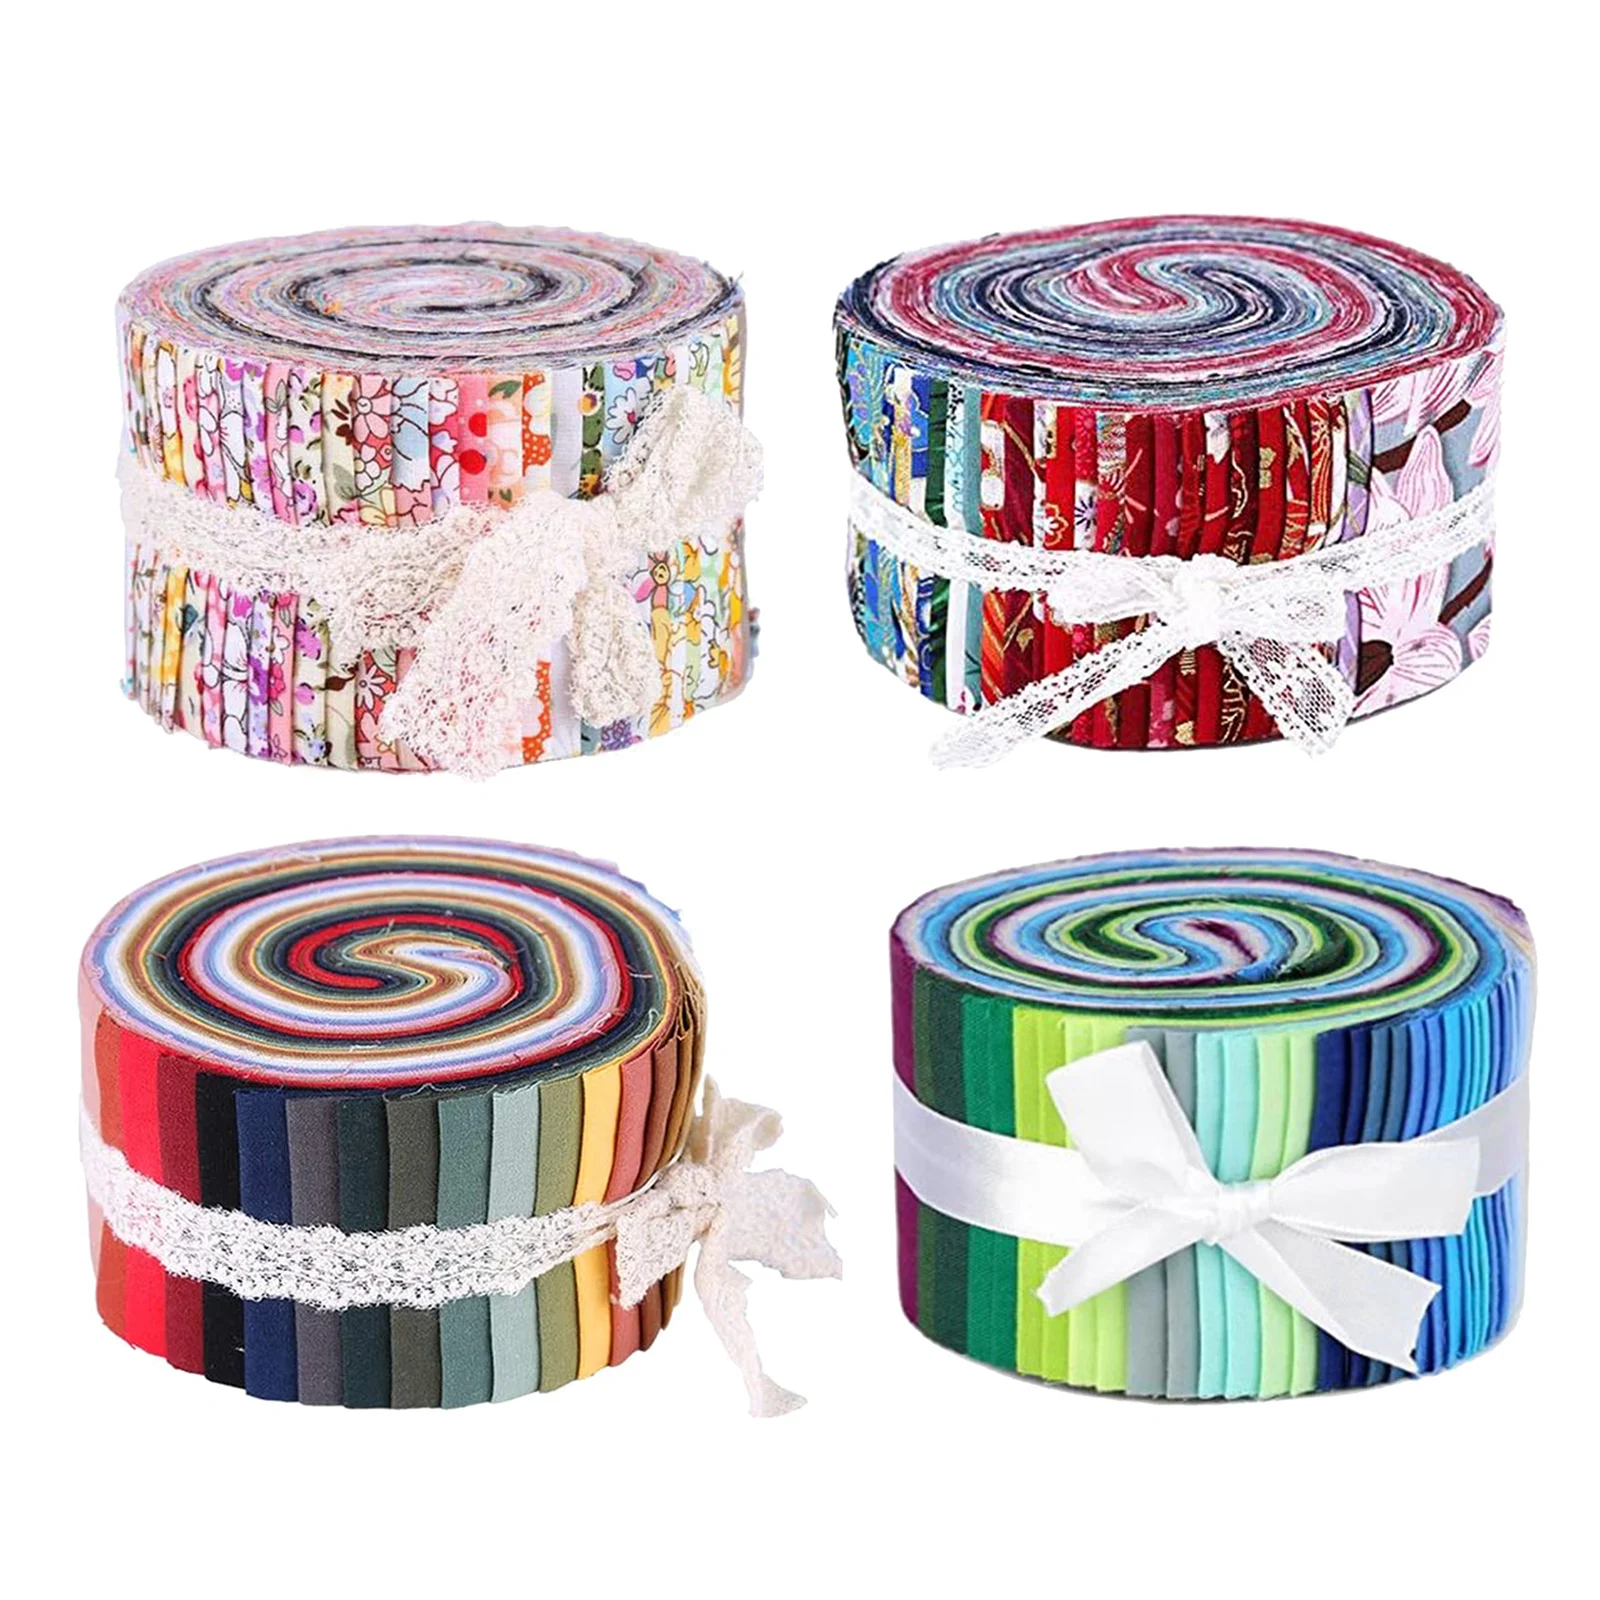 China Jelly Roll Fabric Strips for Quilting,40 Pcs Roll Cotton Fabric for Sewing with Different Patterns DIY Craft Patchwork